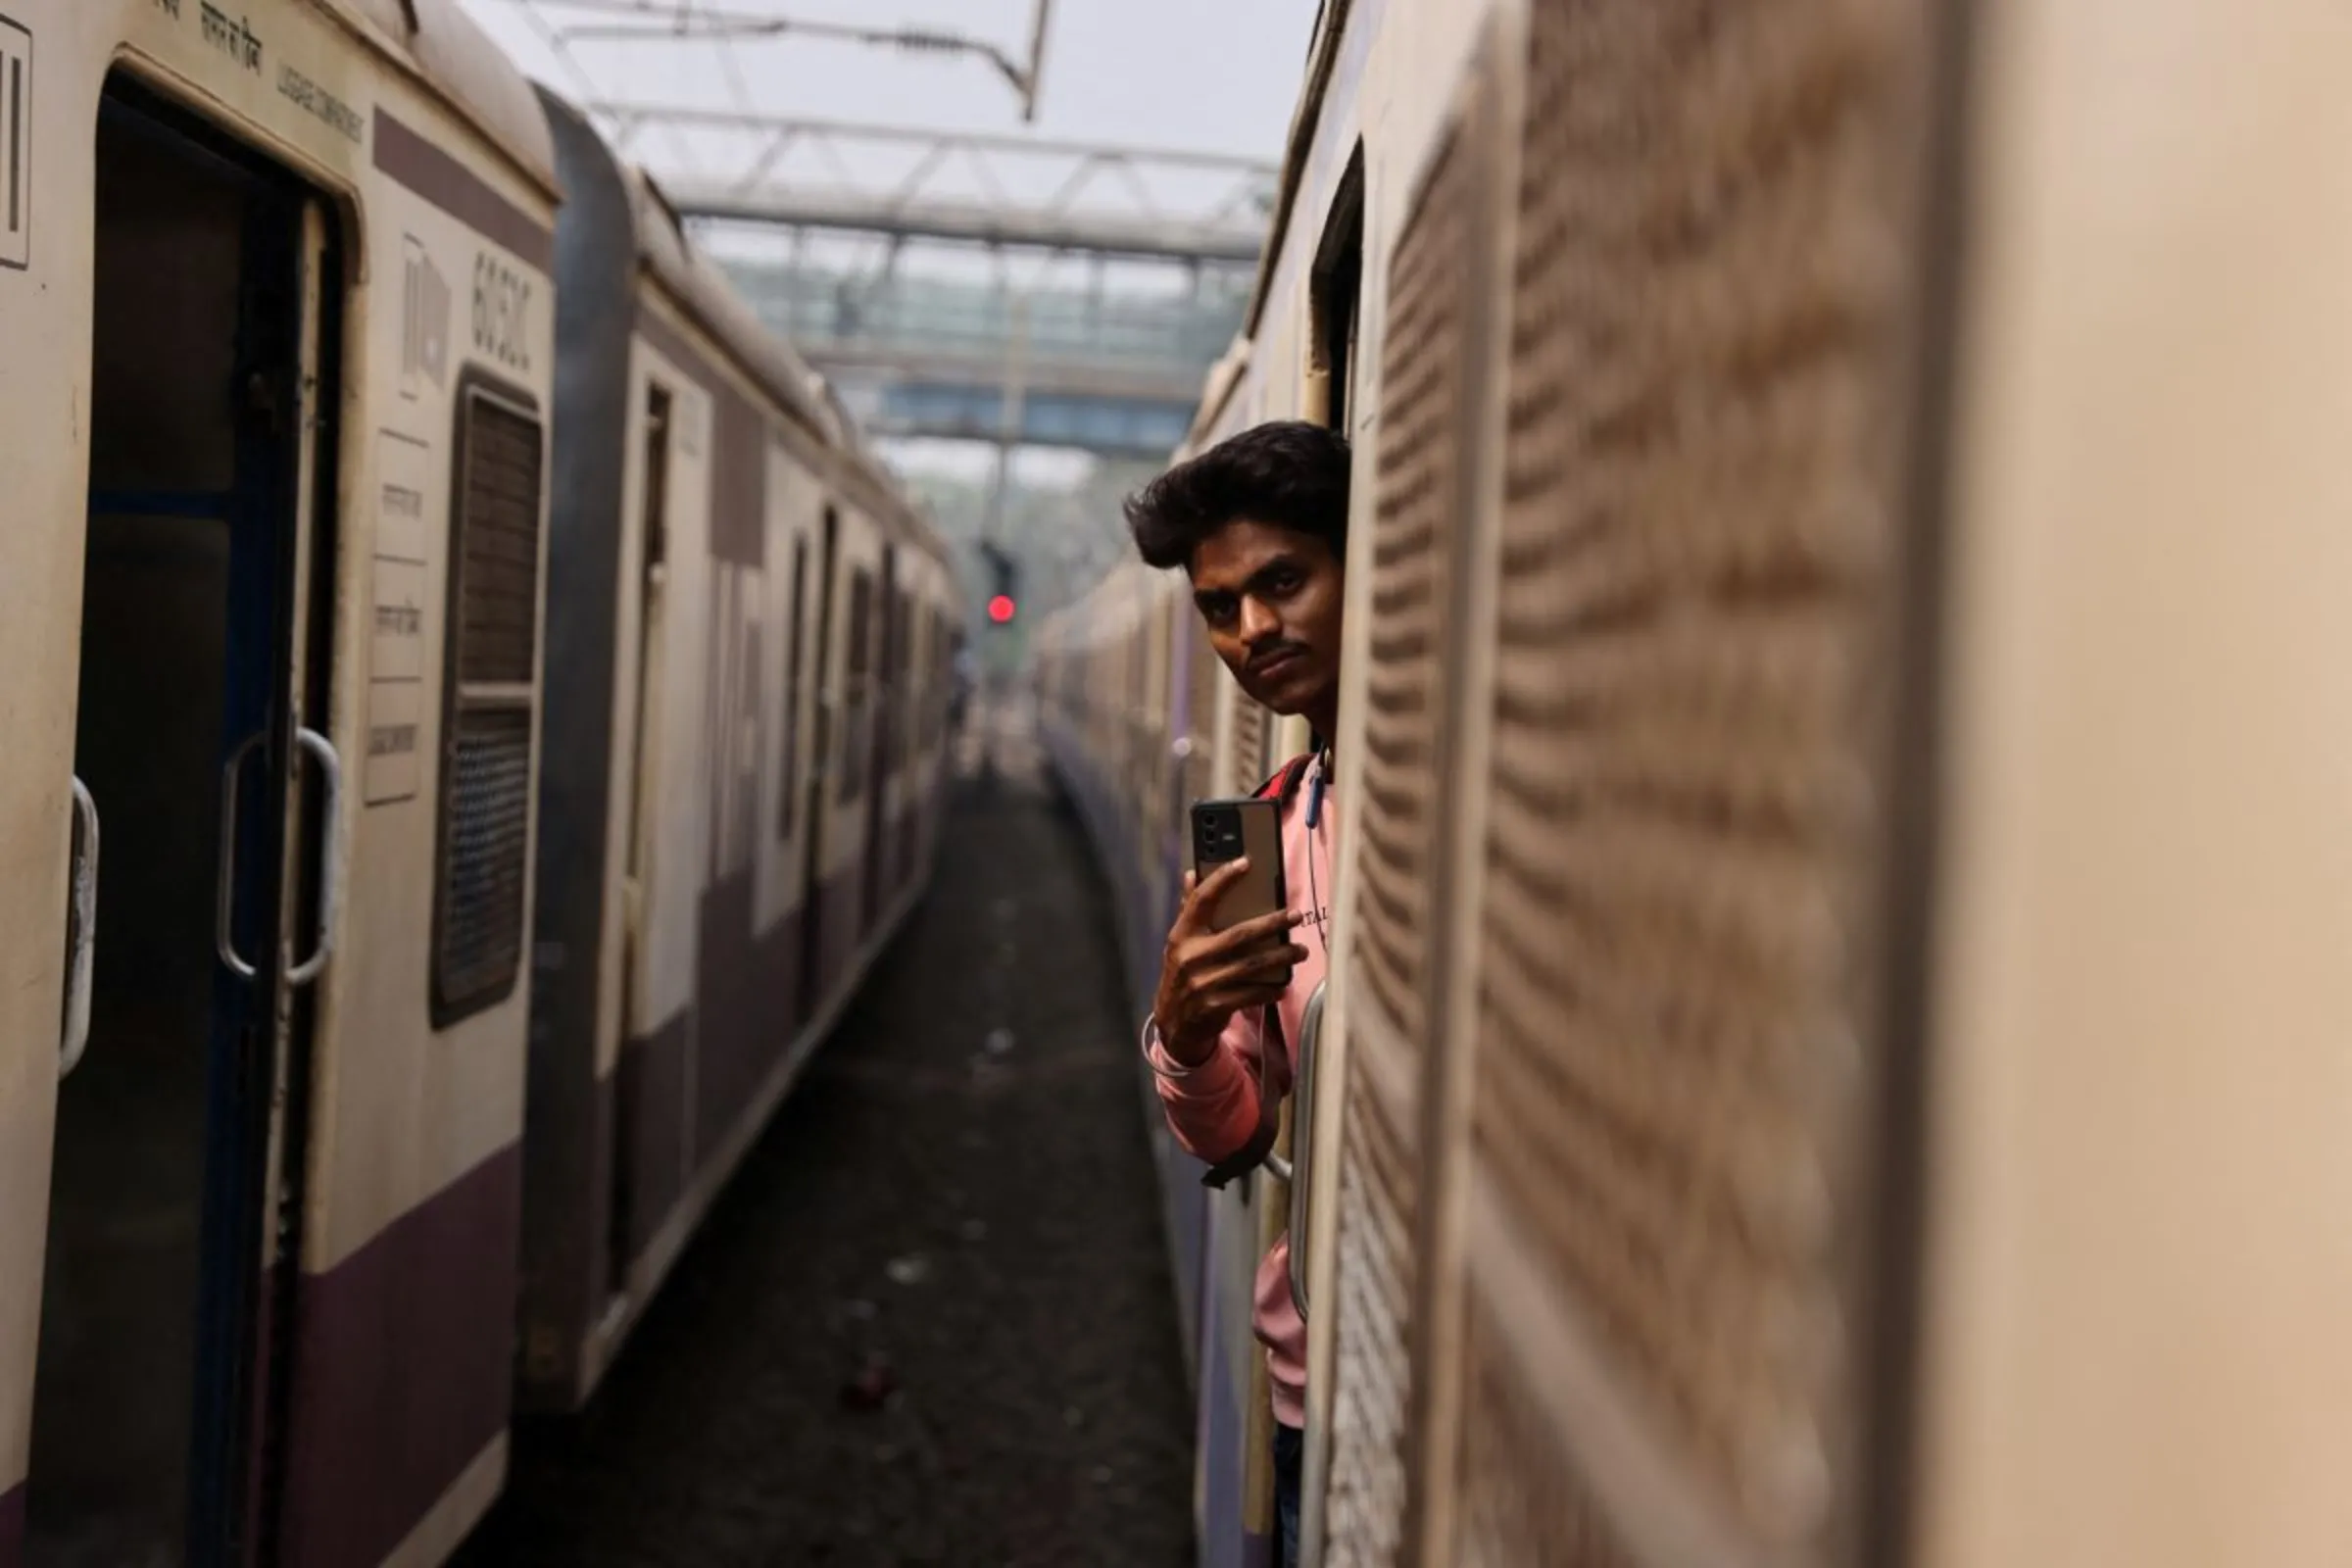 A man shoots a video on his mobile phone while on a local train in Mumbai, India, March 13, 2023